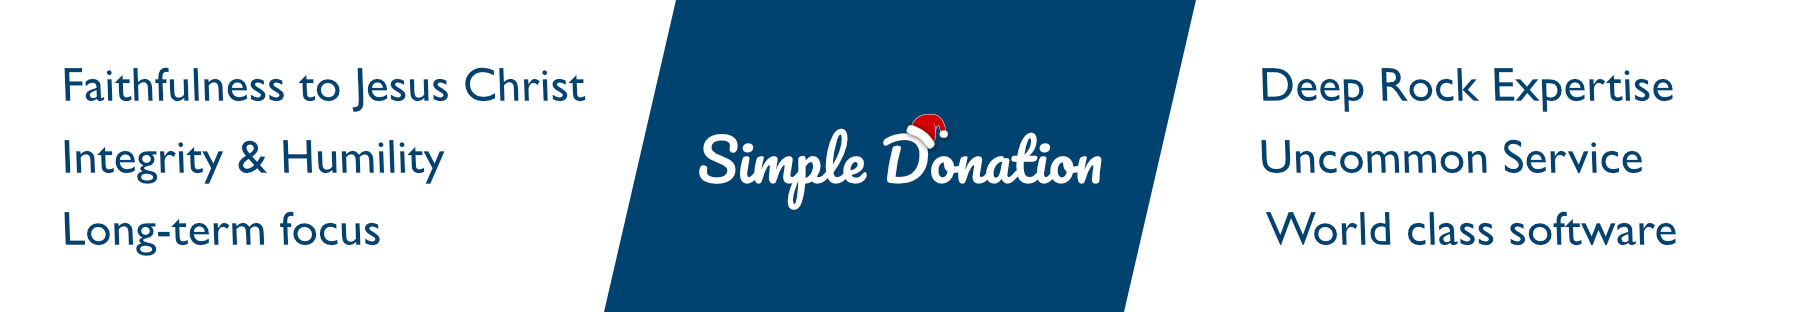 The 12 Days of Christmas, RockRMS Style-By Simple Donation